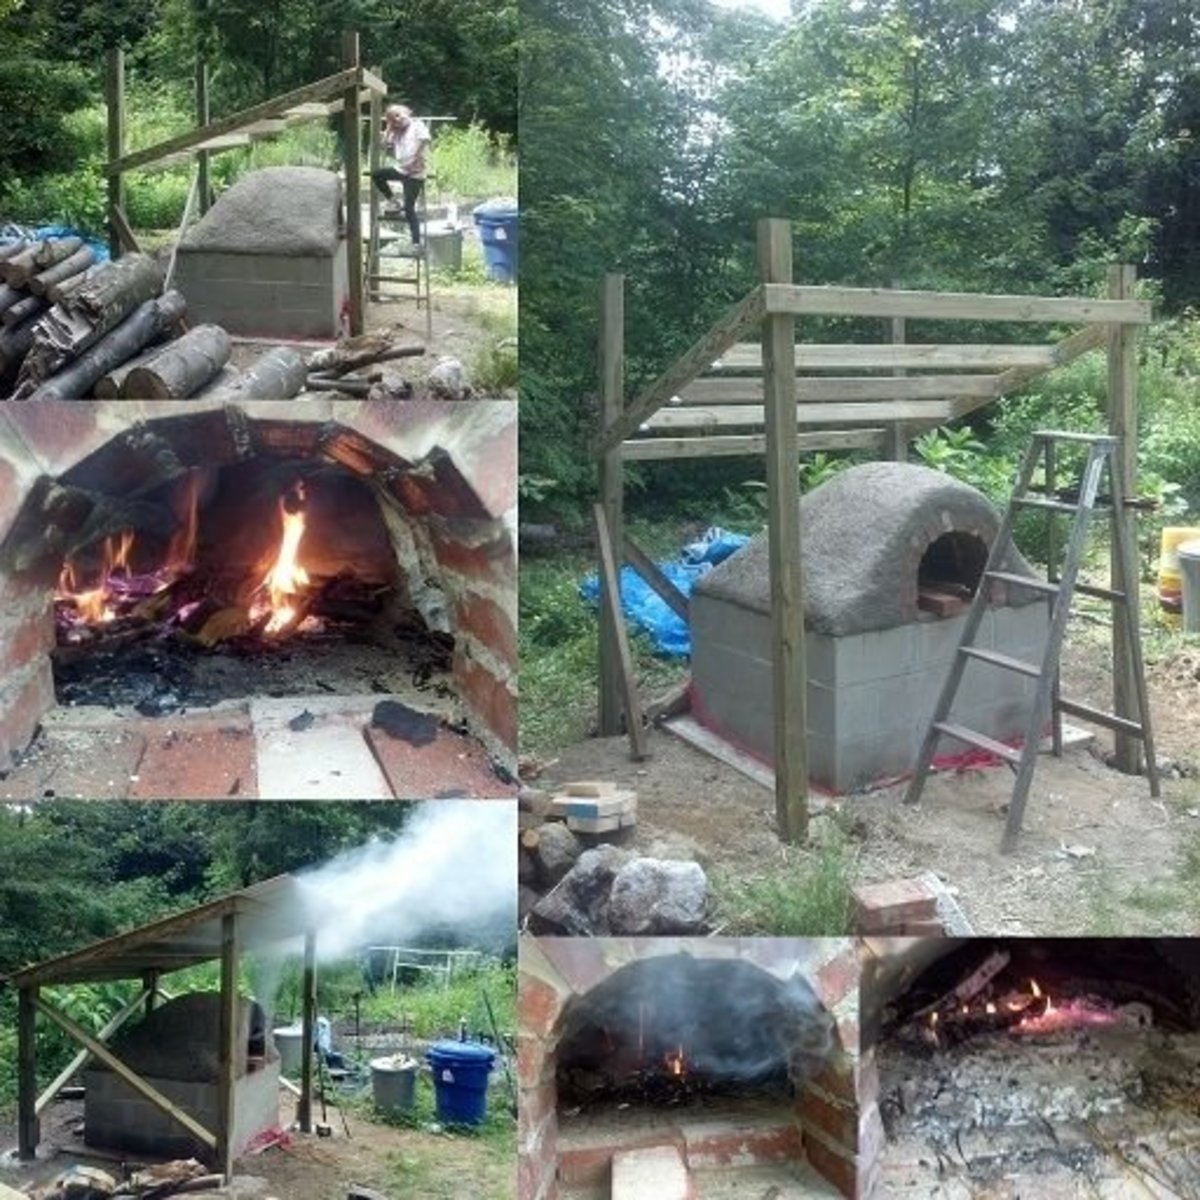 Build a roof and fire the oven!